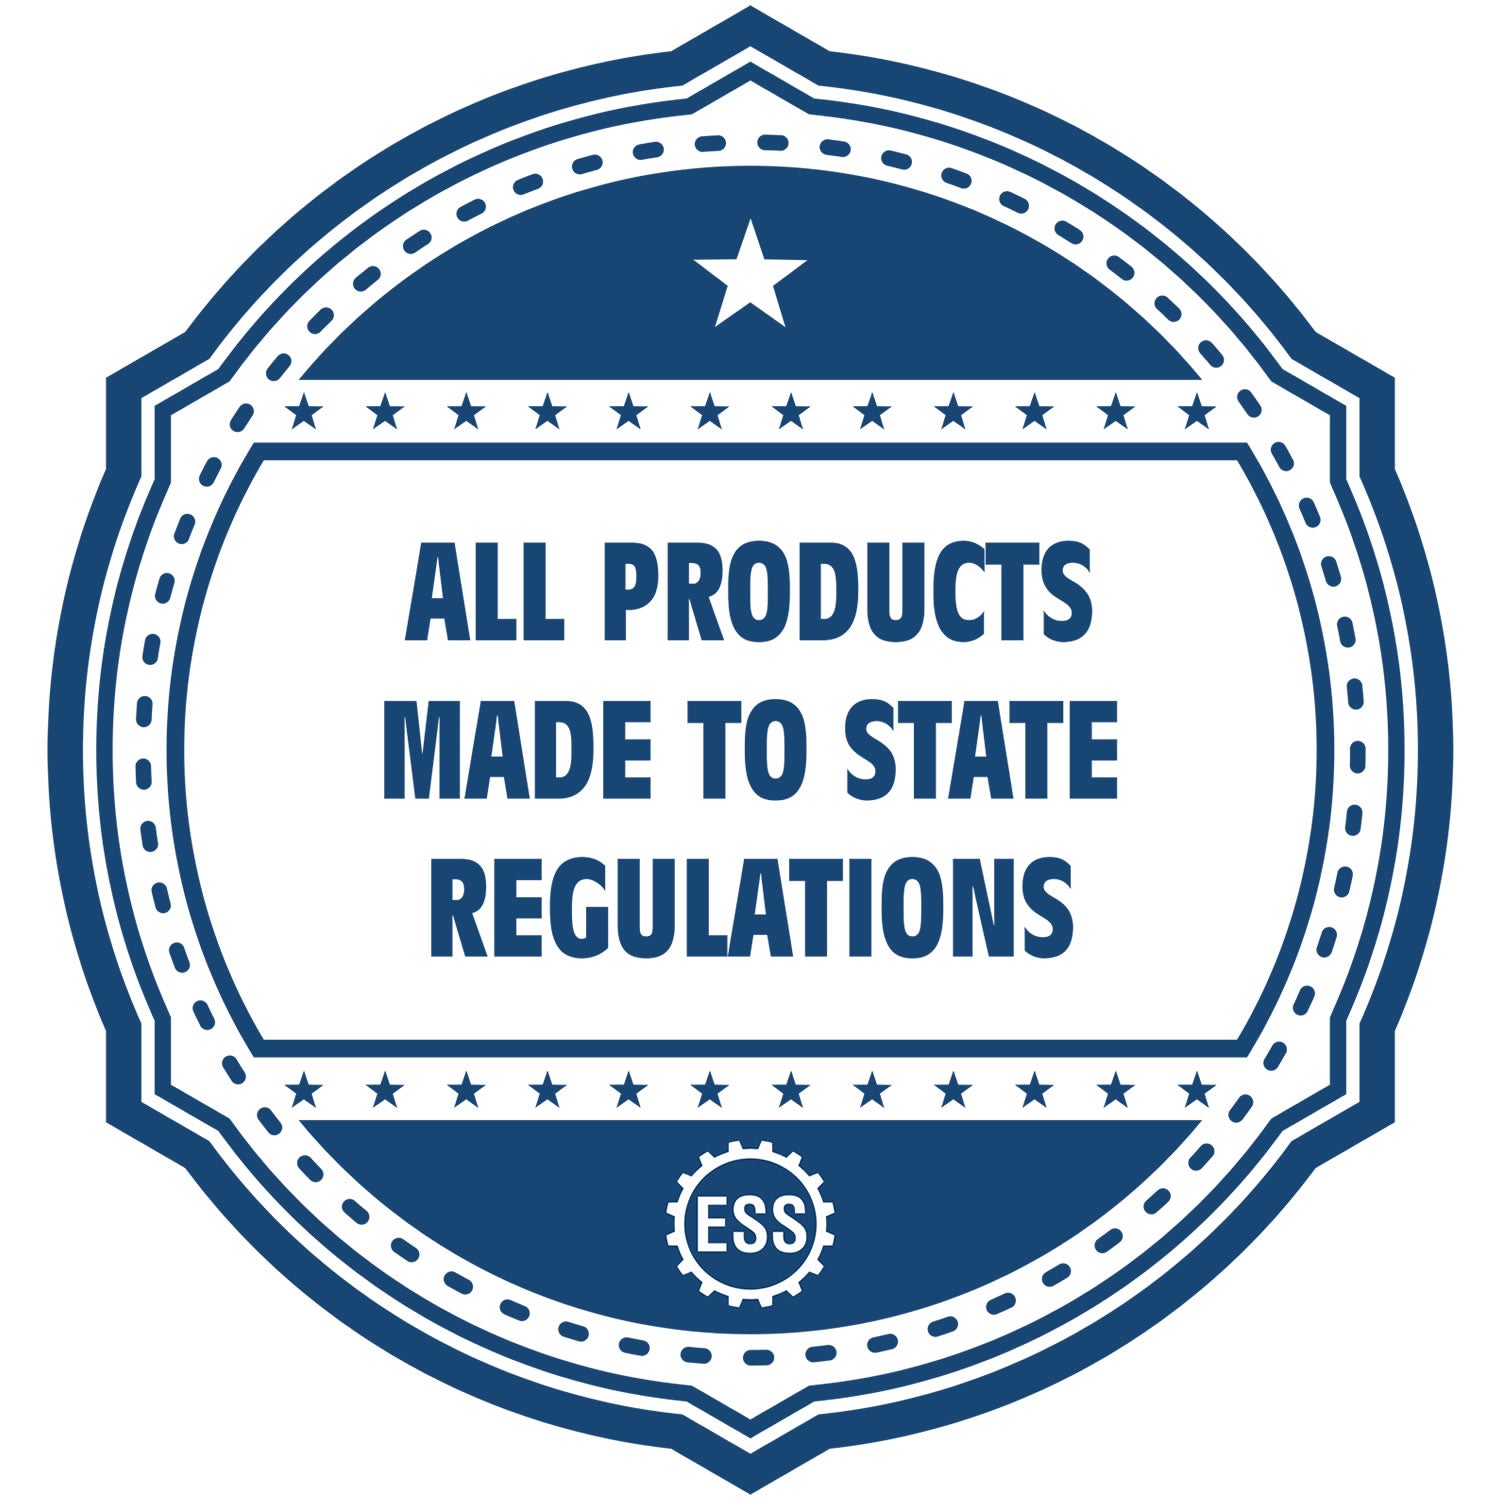 An icon or badge element for the Handheld North Carolina Architect Seal Embosser showing that this product is made in compliance with state regulations.